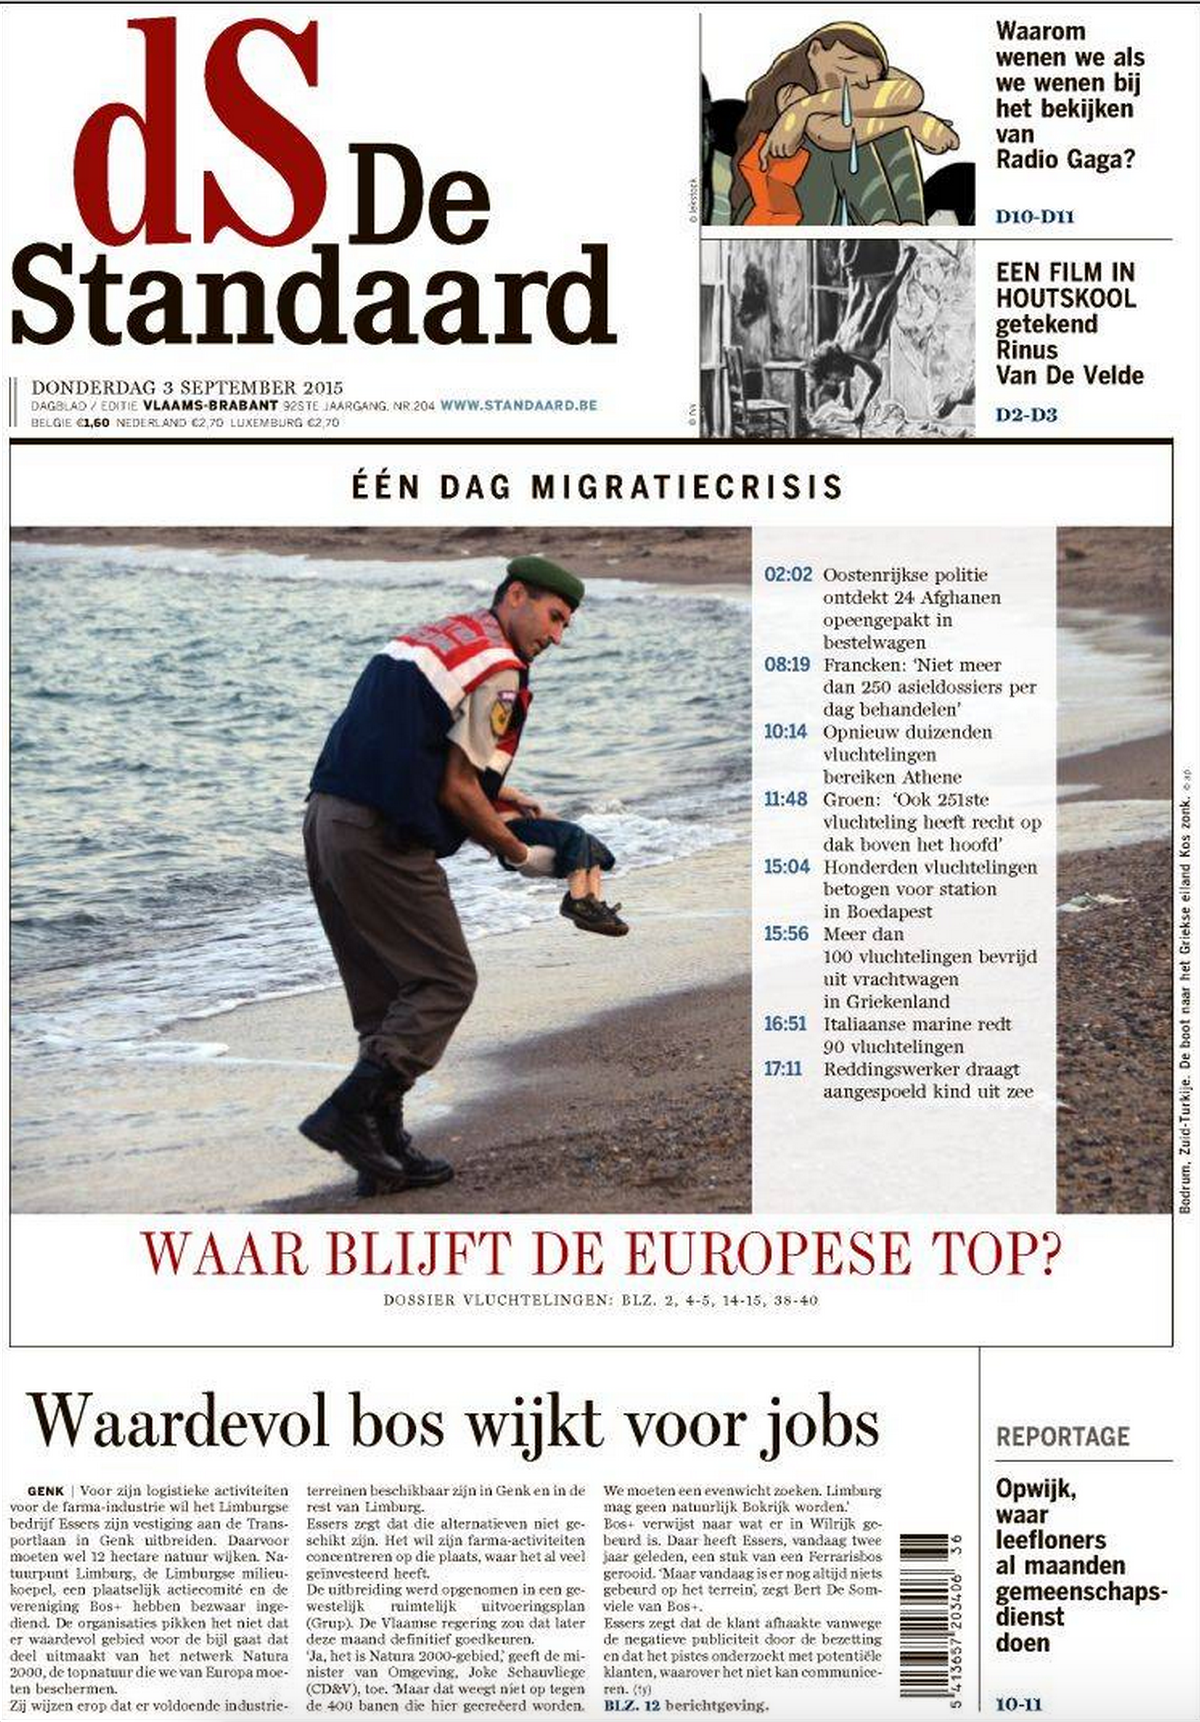 Drowned Migrant Boy De Standaard Front Page